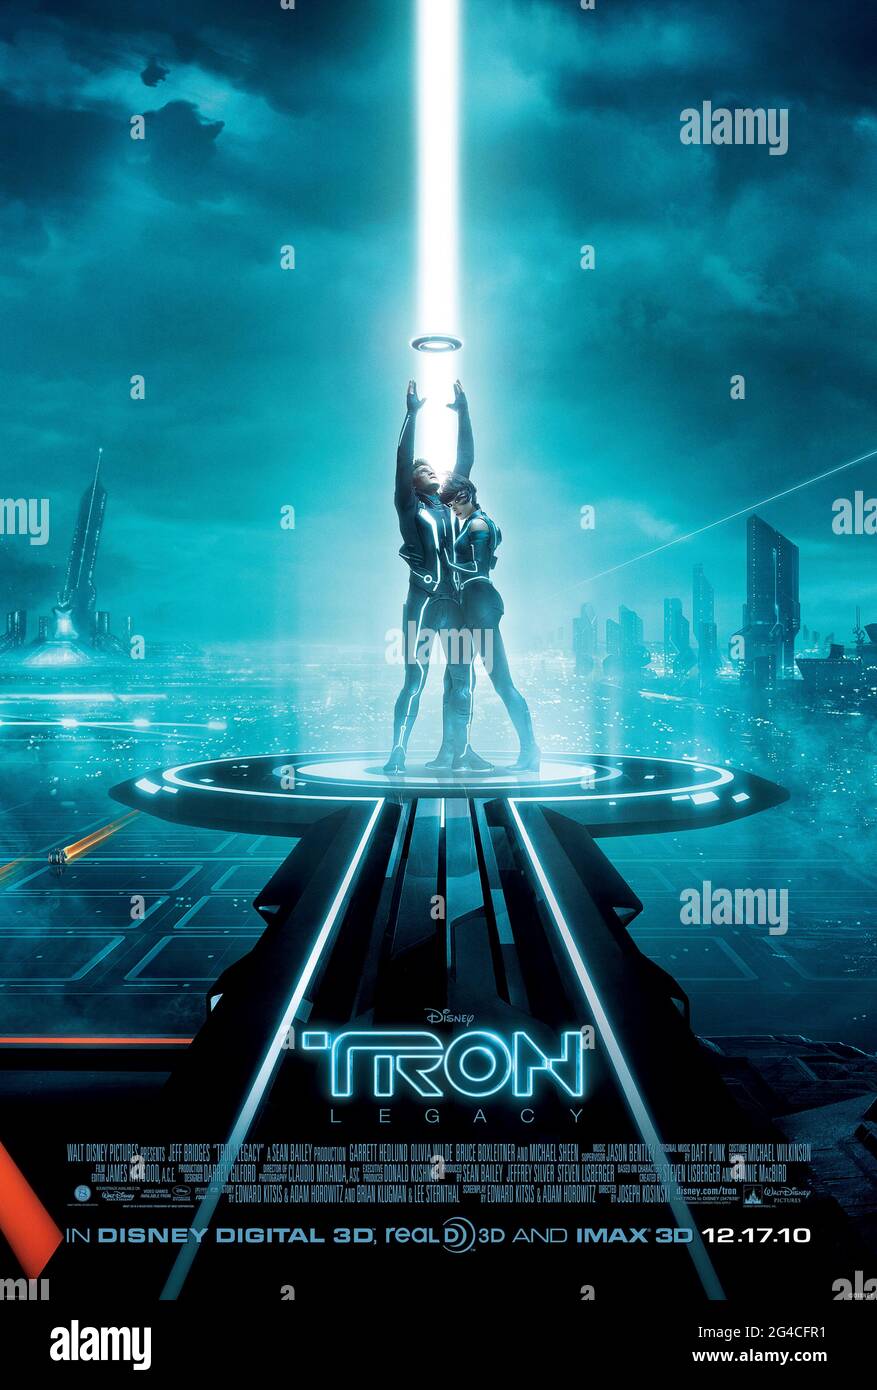 TRON: Legacy (2010) directed by Joseph Kosinski and starring Jeff Bridges, Garrett Hedlund, Olivia Wilde and Daft Punk. Visually and aurally stunning sequel where Sam Flynn joins his father in a virtual self contained world ruled by CLU who has plans to invade the real world. Stock Photo